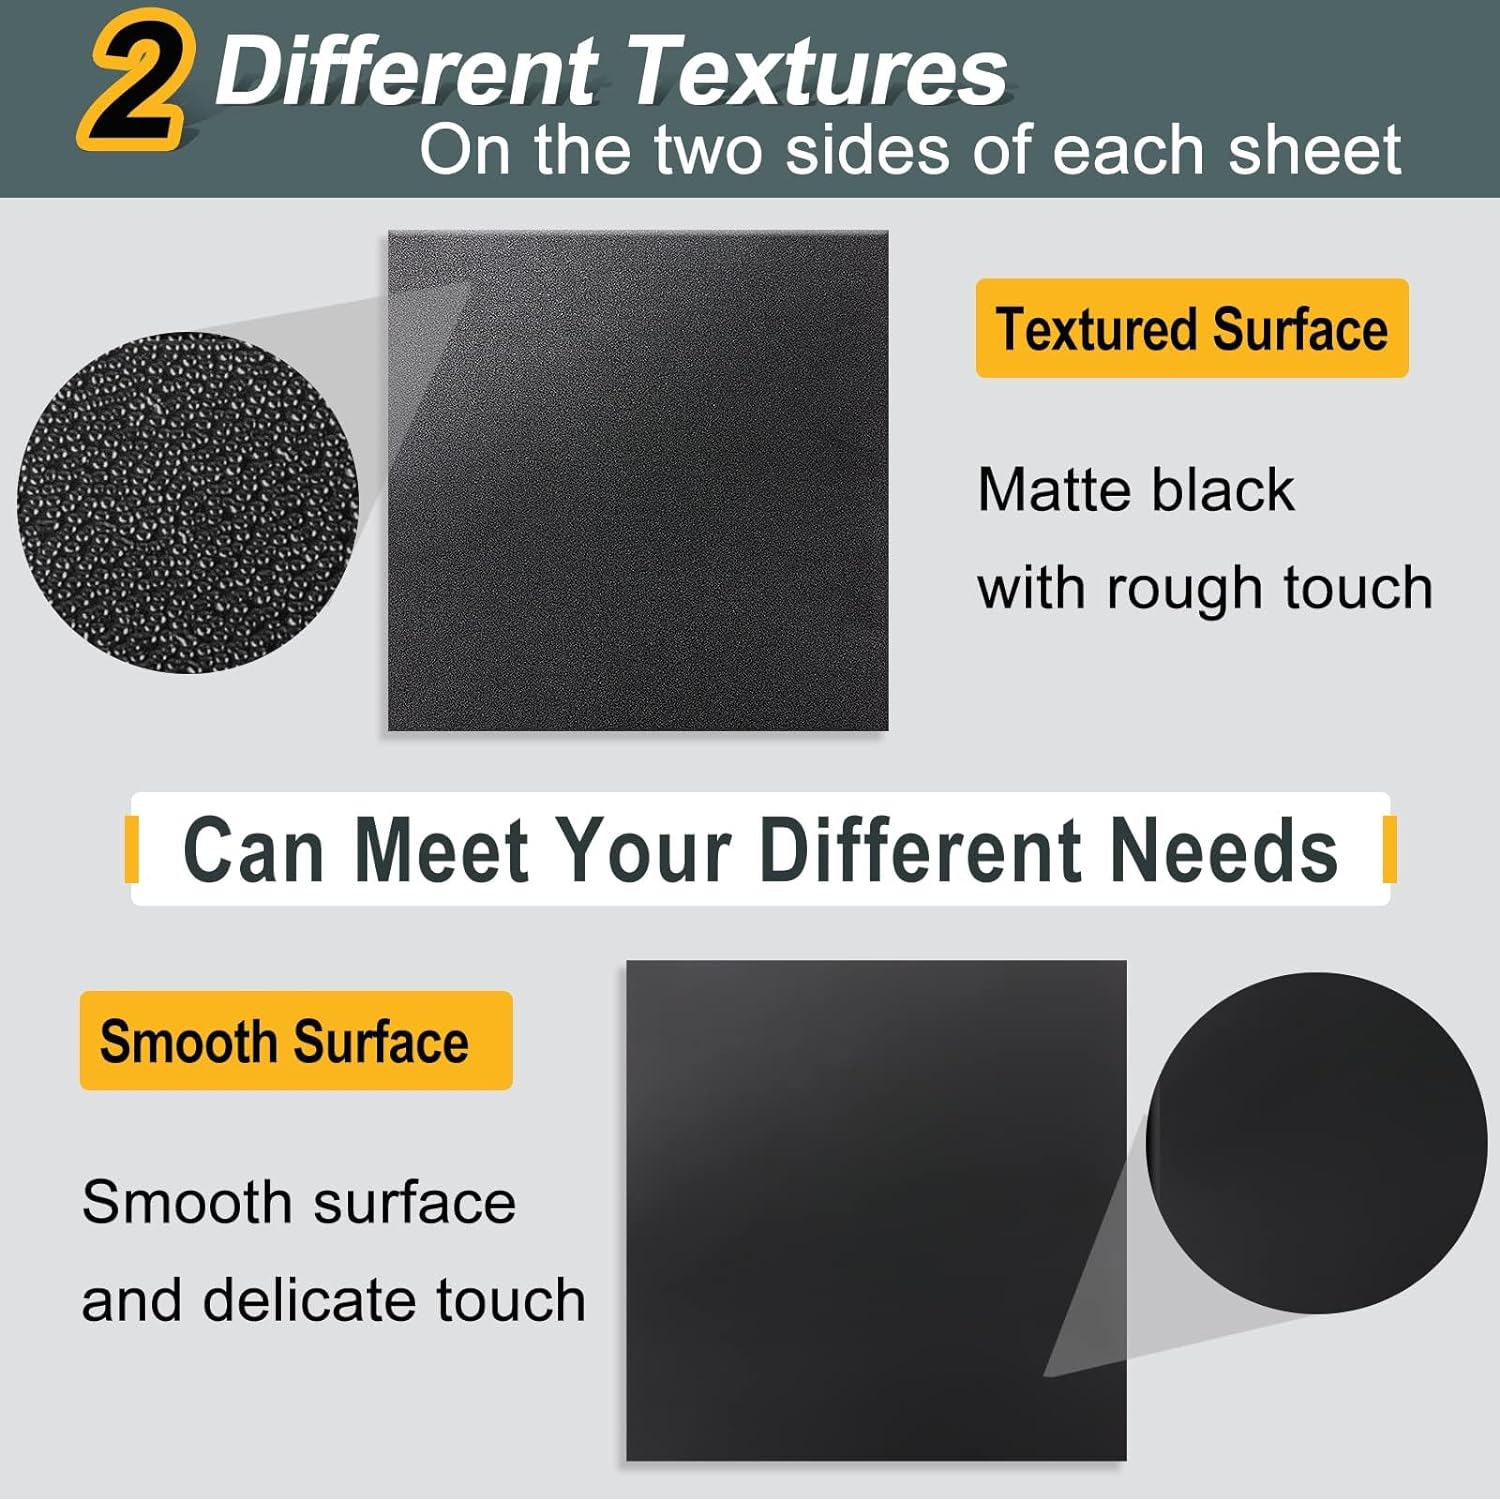 Paidu Black ABS Plastic Sheet 12" x 36"x 0.06" Flexible Moldable Impact Strength and High Tensile 1/16" Thick 1.5mm Abs Sheet Moldable Plastic DIY Materials for Home Decor and Handicrafts 6 Pack